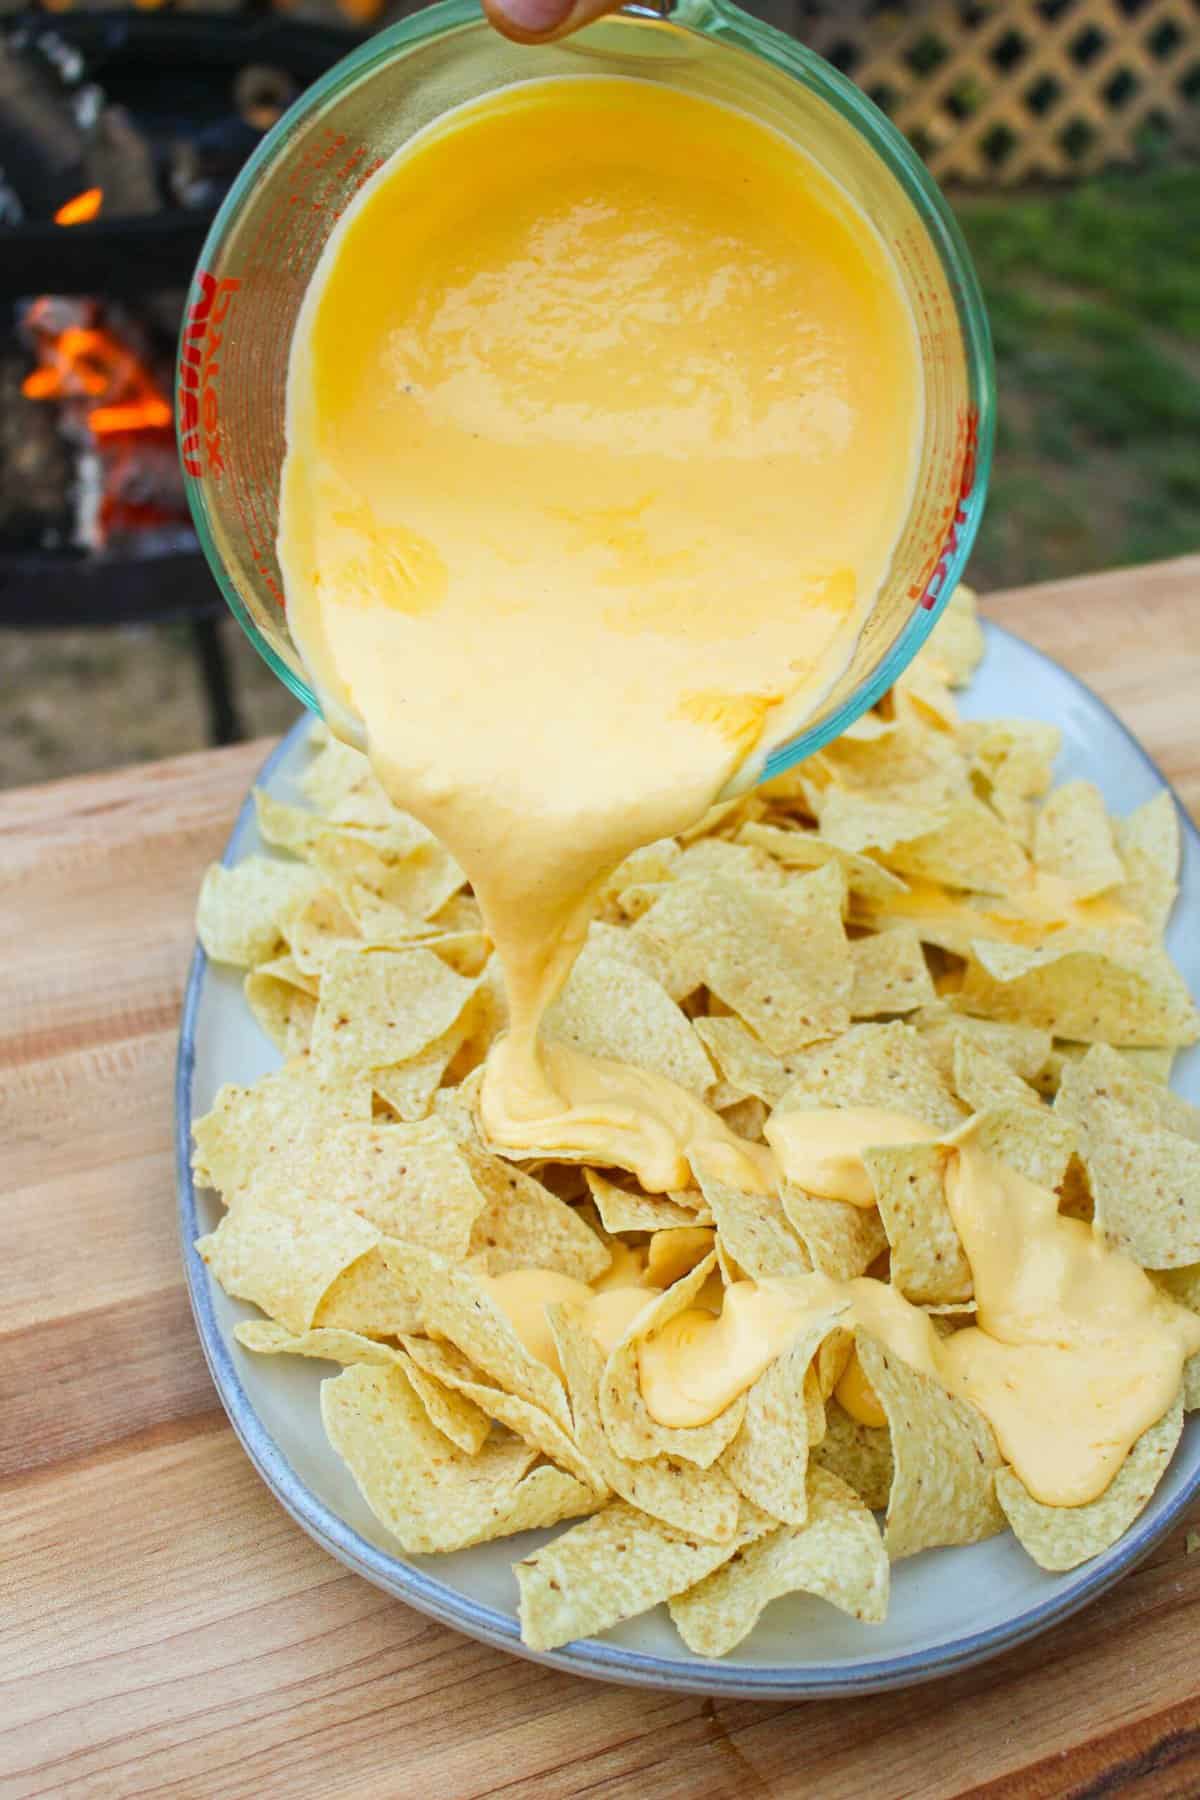 nacho cheese being drizzled over a platter full of tortilla chips